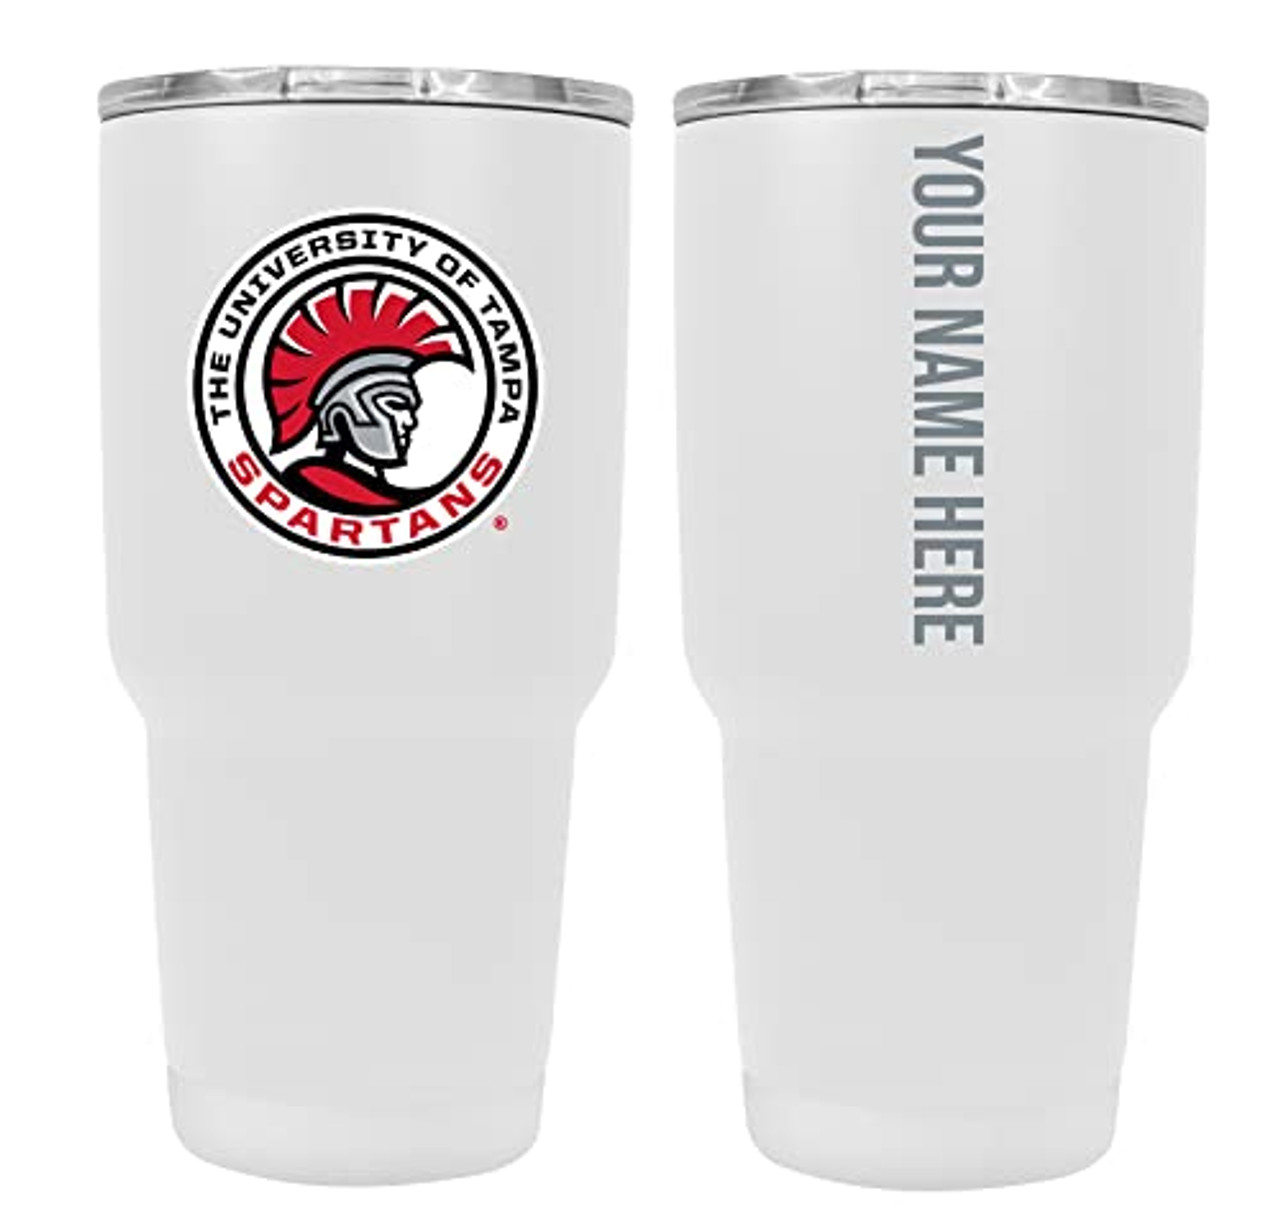 Collegiate Custom Personalized University of Tampa Spartans, 24 oz Insulated Stainless Steel Tumbler with Engraved Name (White)